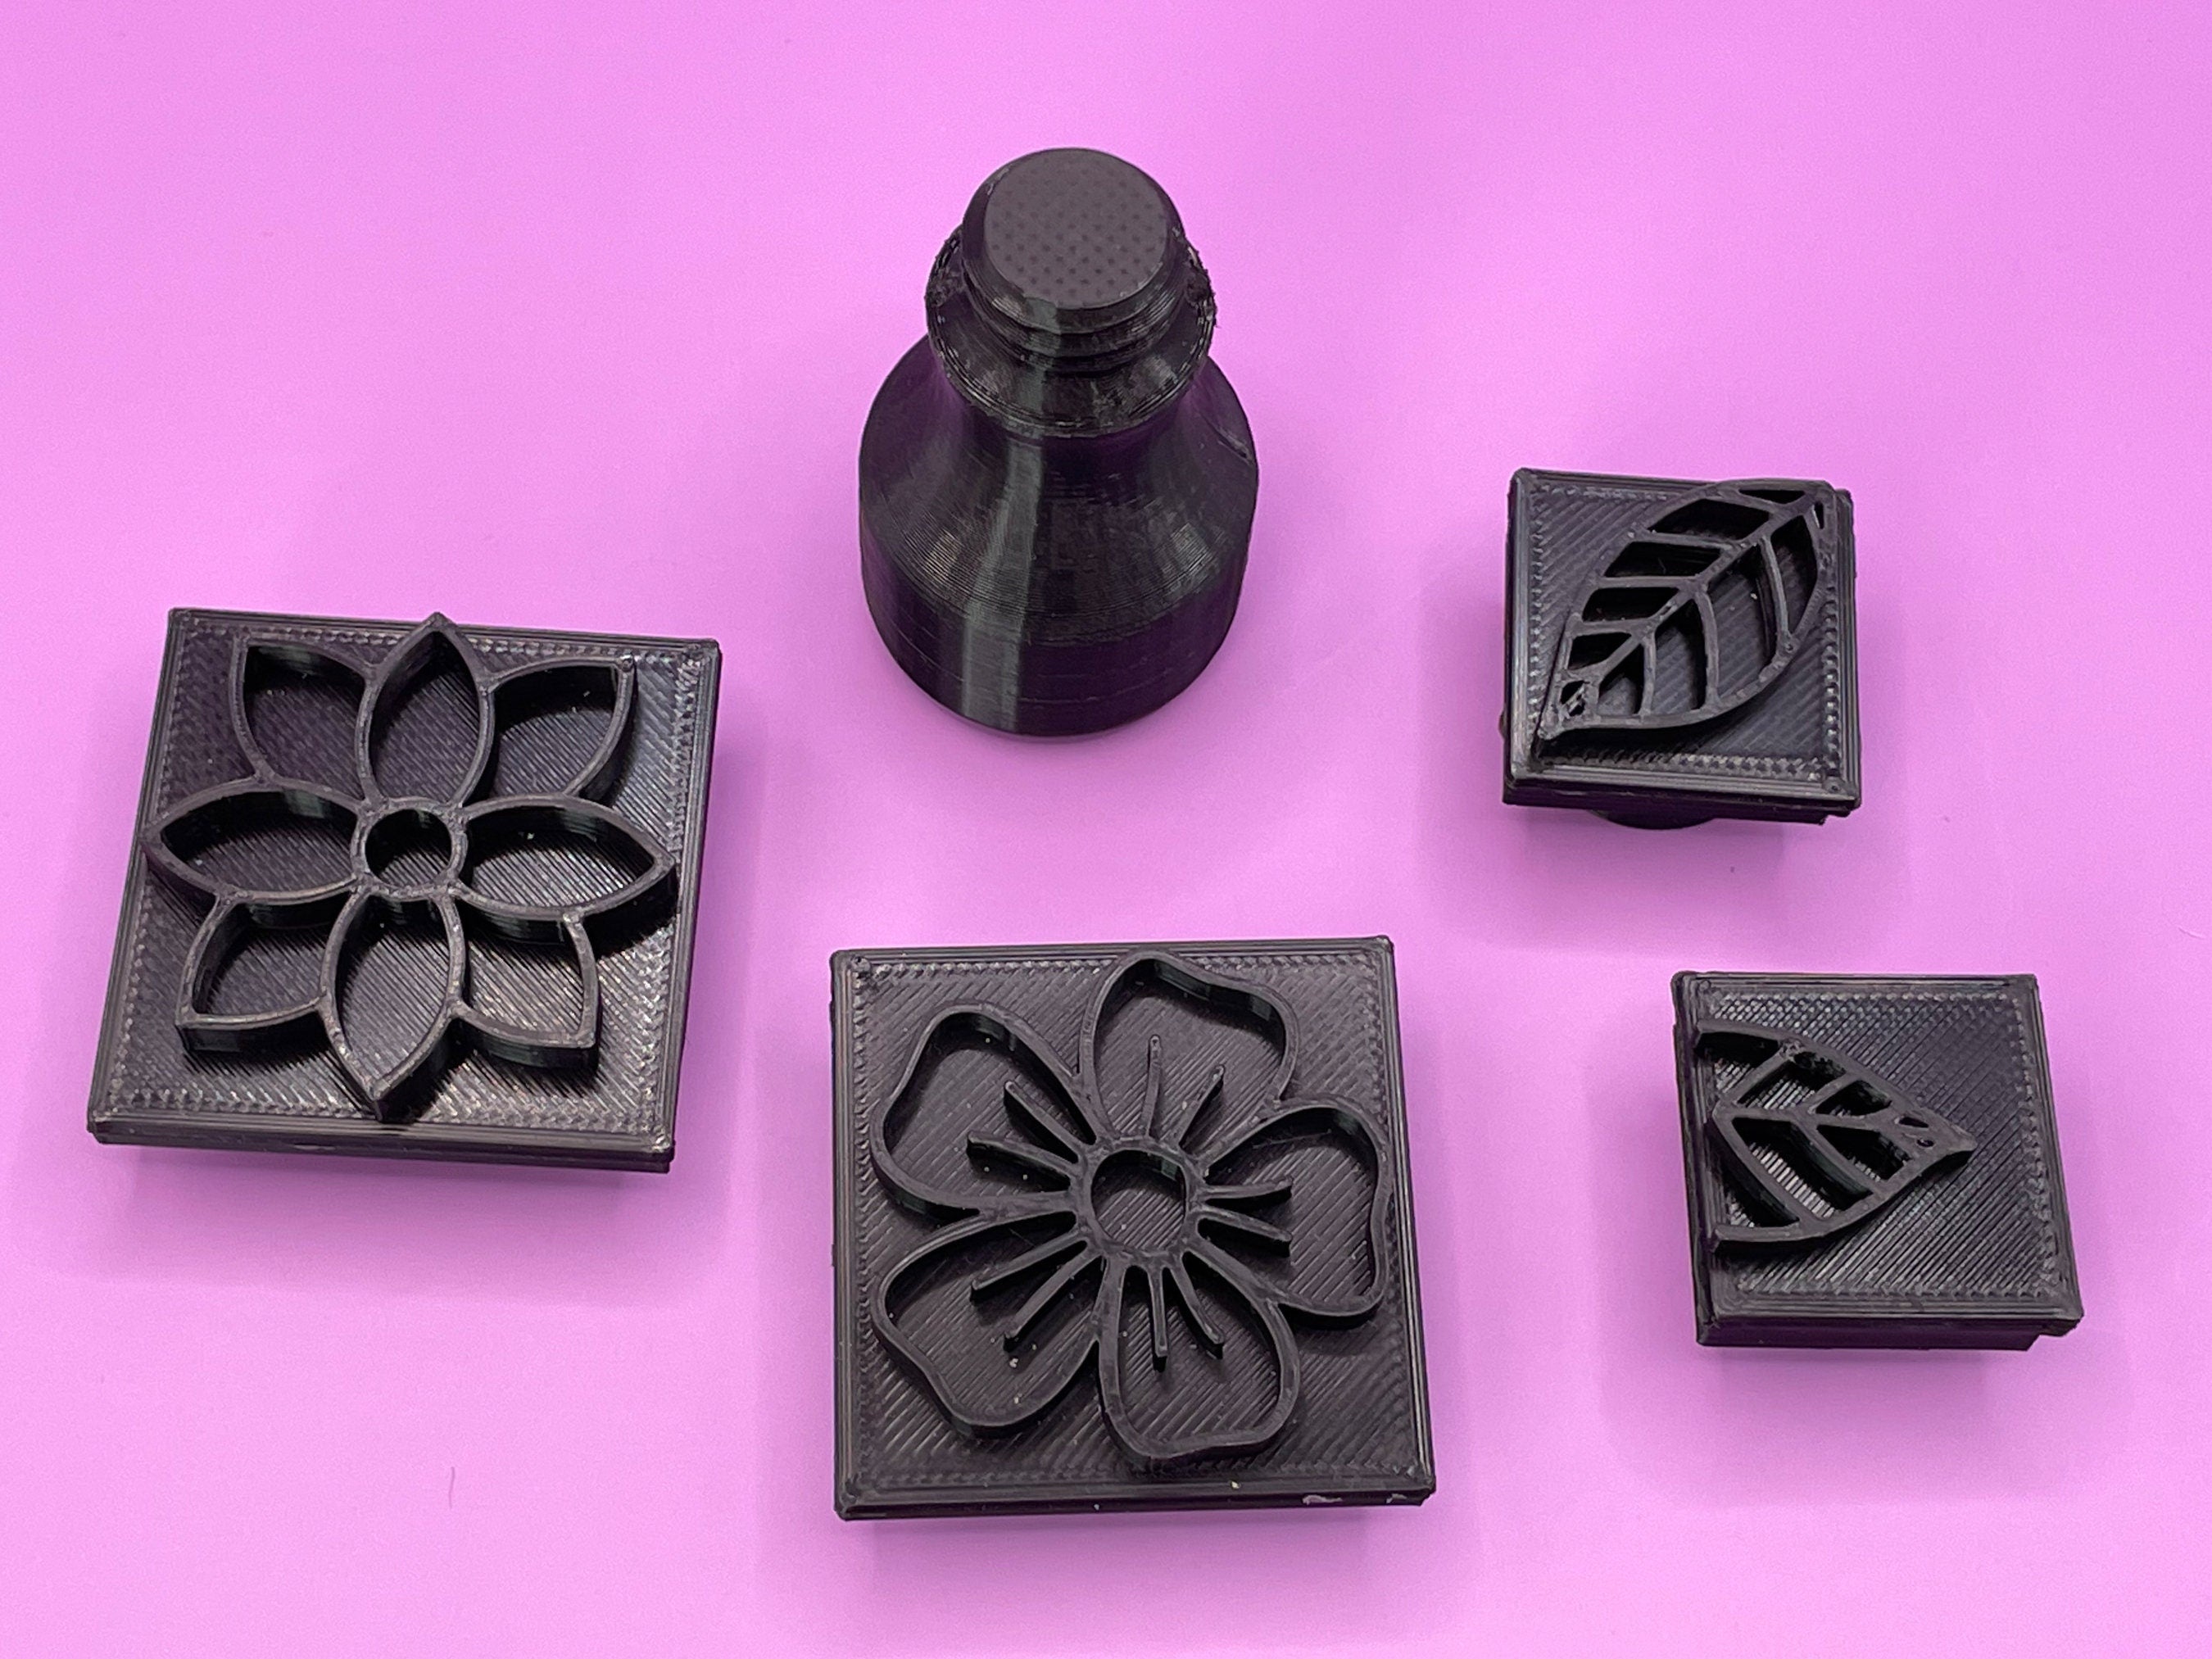 Set of 2 flower stamps, a full leave stamp and a half leaf stamp interchangeable - A Mayes Pottery